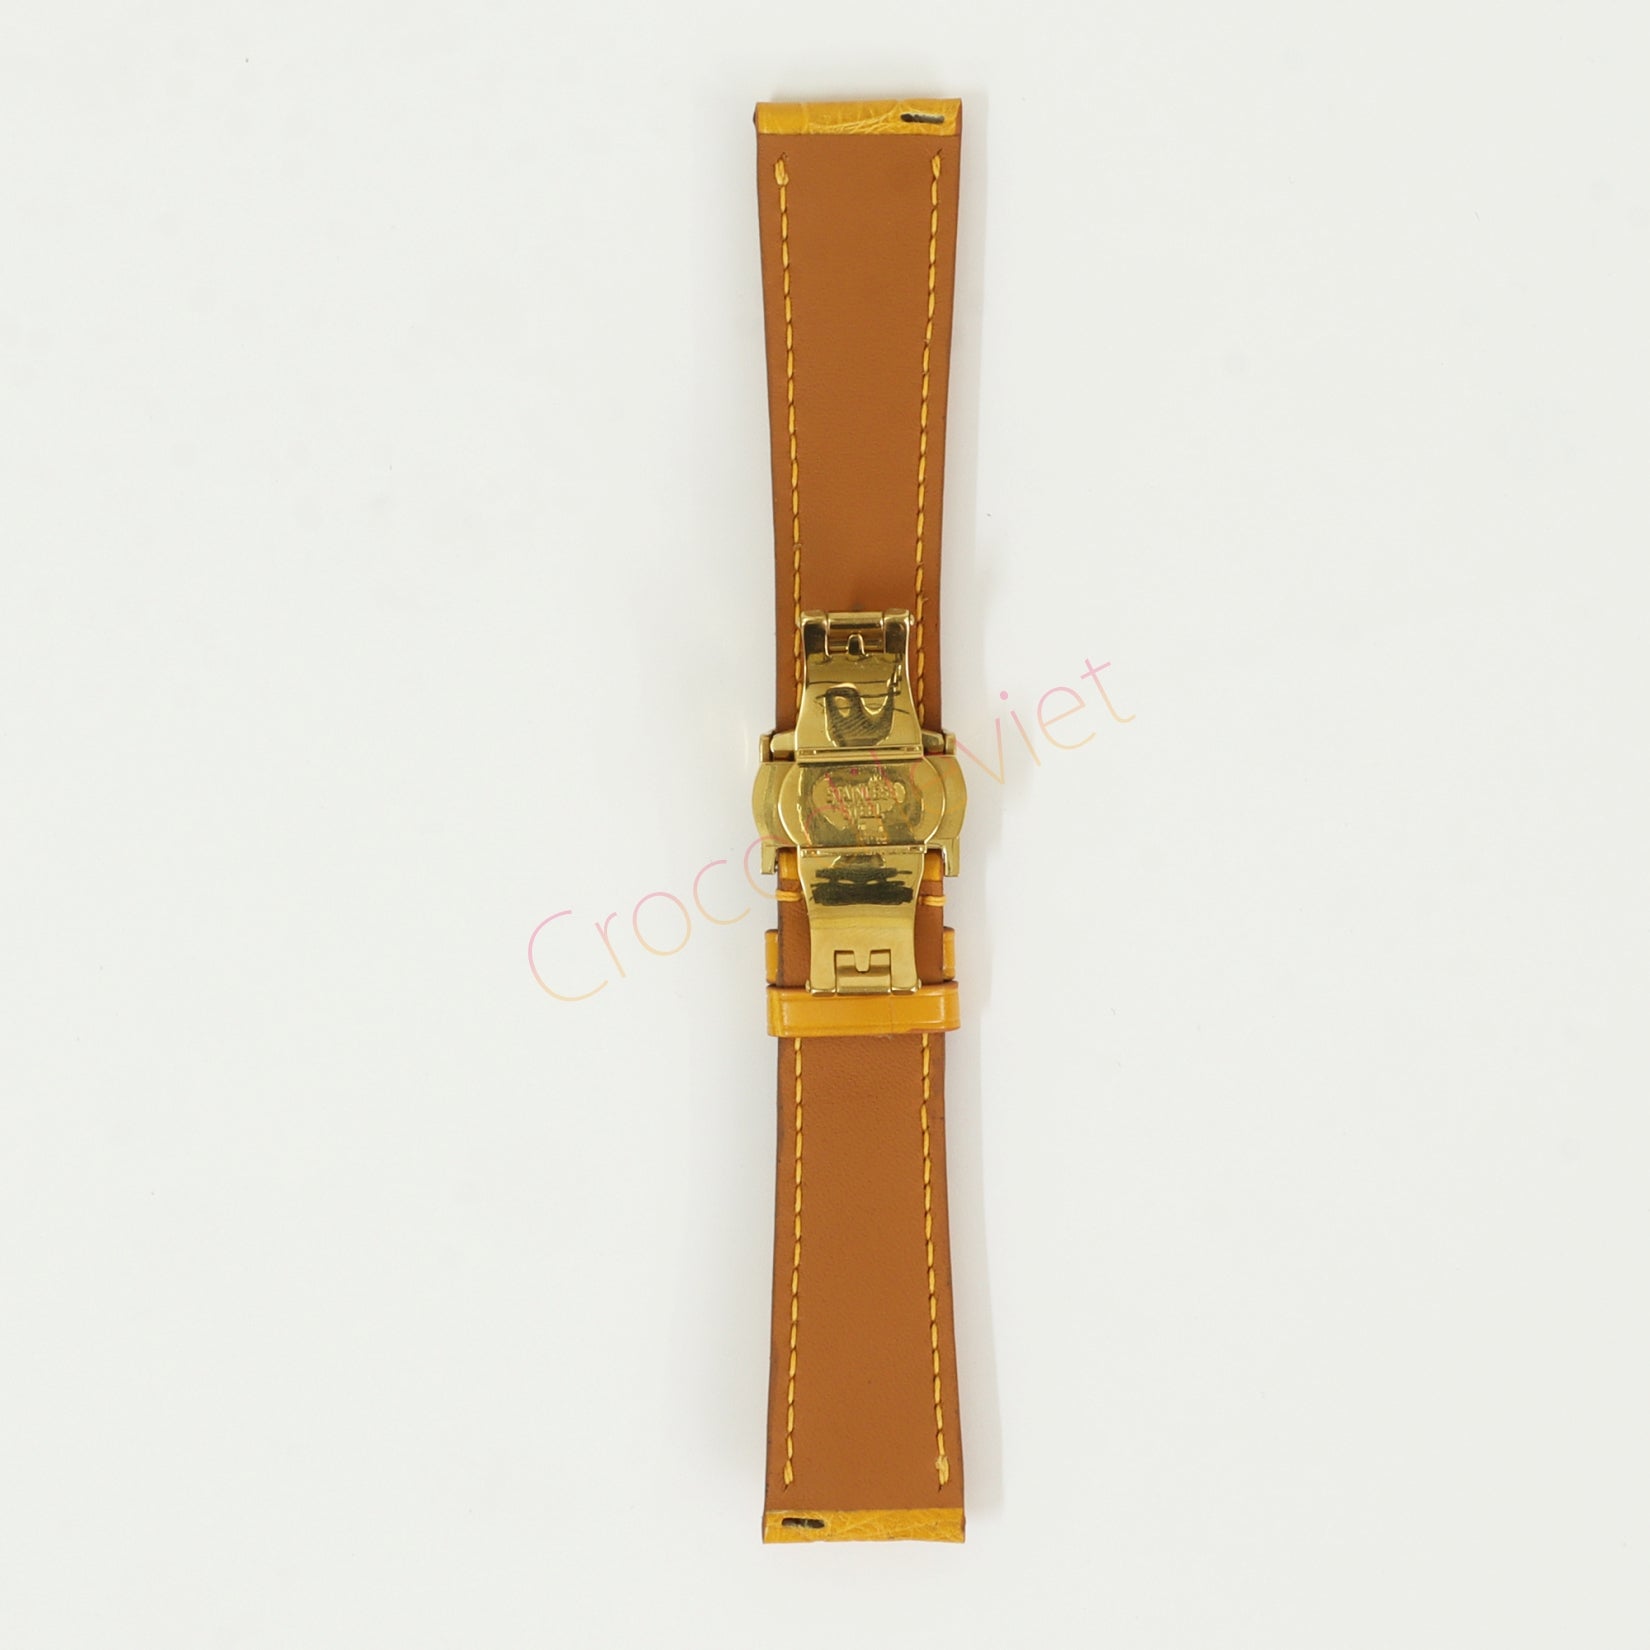 Yellow Genuine Alligator Leather Watch Straps With Deployant Clasp, Leather Watch Bands Quick Release Pins, Handmade Leather Watch Strap